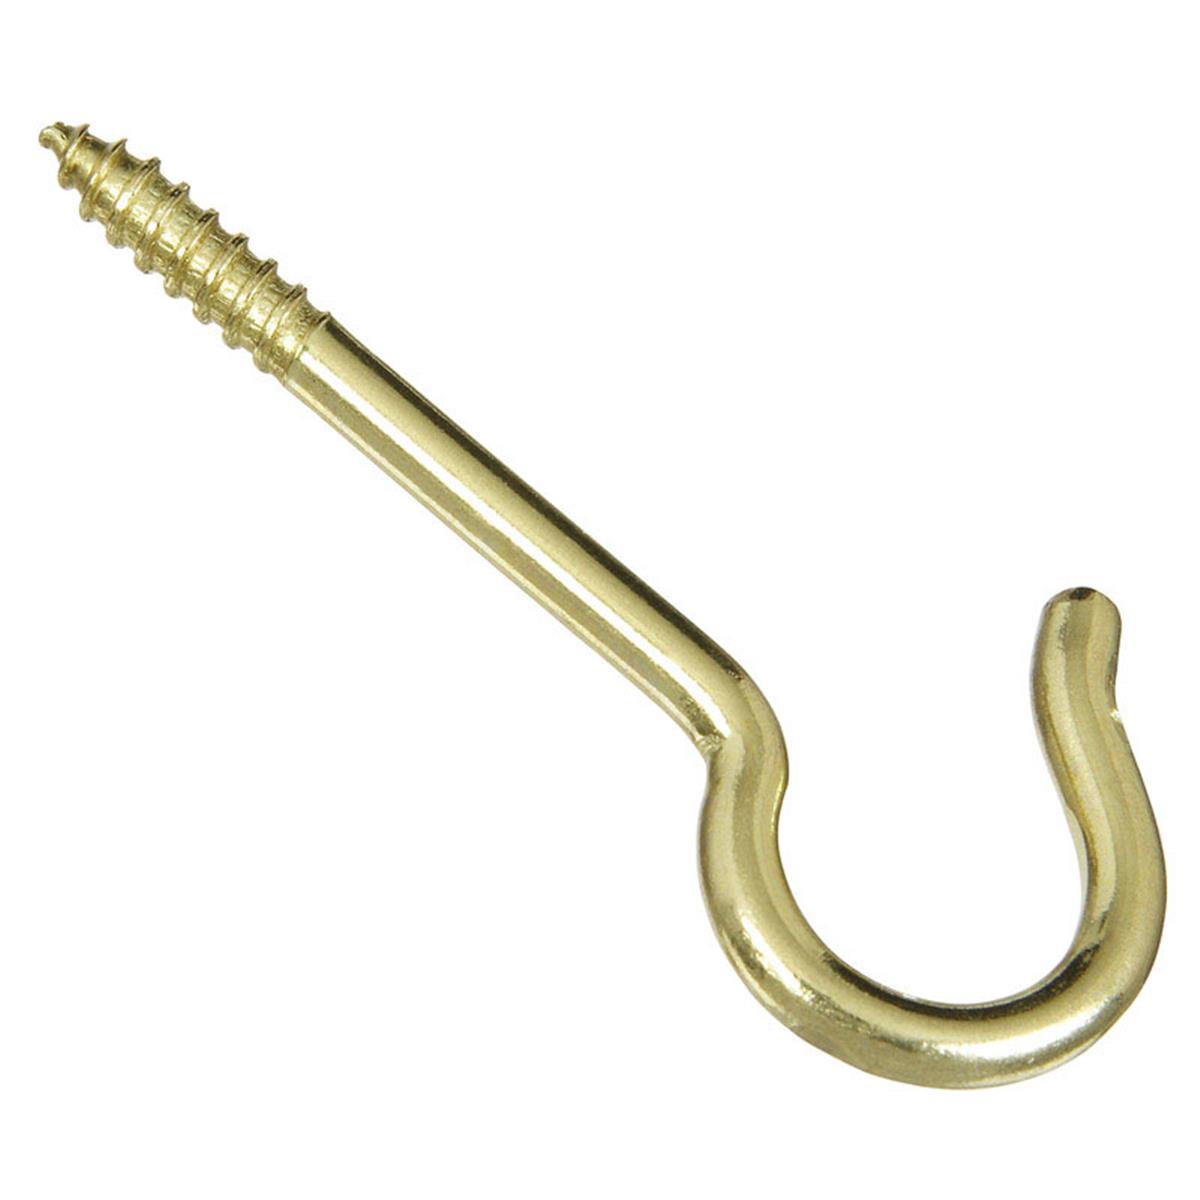 5705942 2.56 In. Ceiling Hook, Solid Brass - Pack Of 3